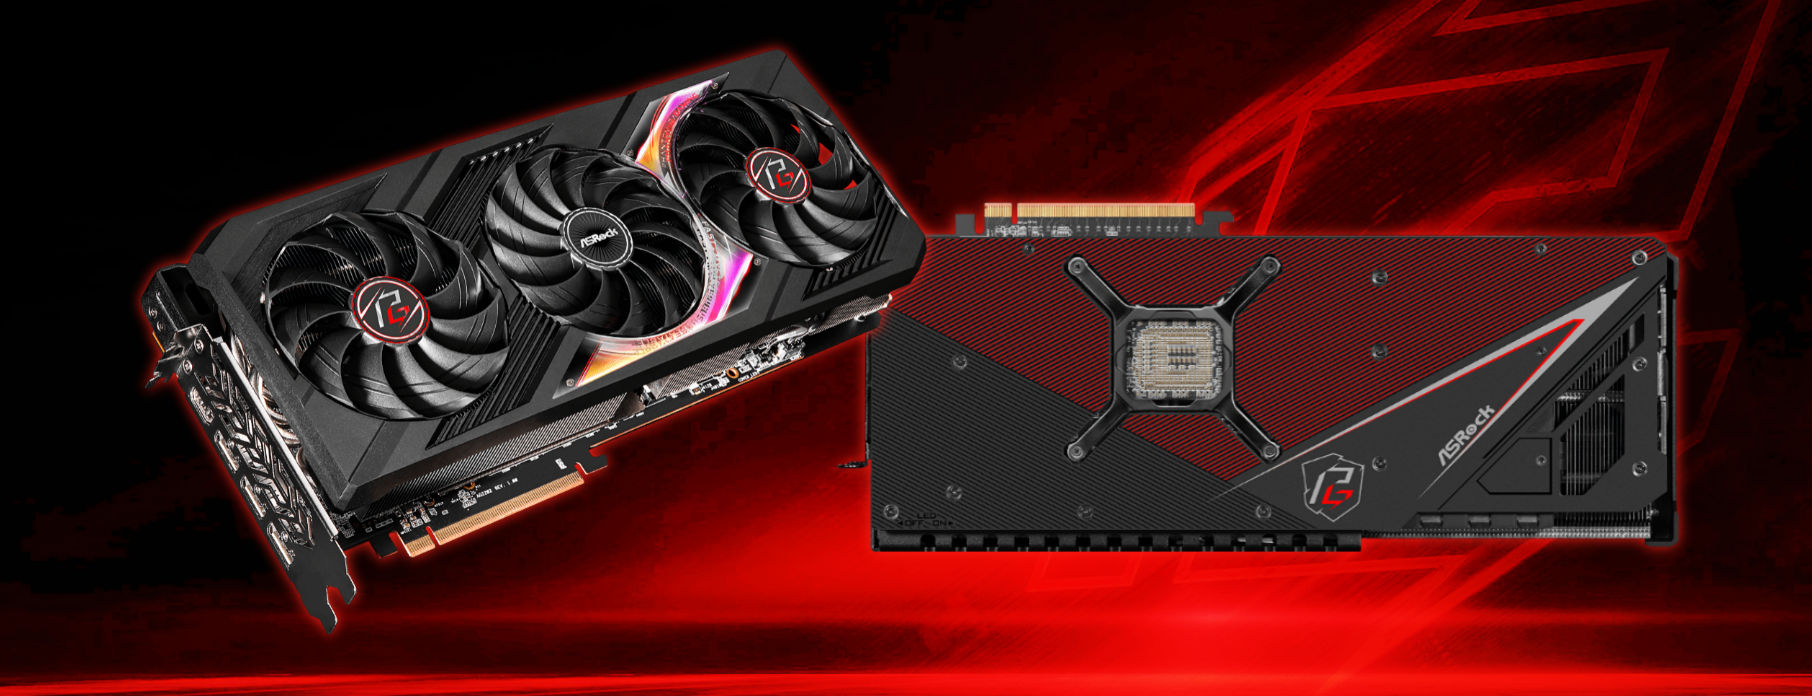 ASRock Radeon RX 7800 XT graphics card with 16GB VRAM spotted at EEC 